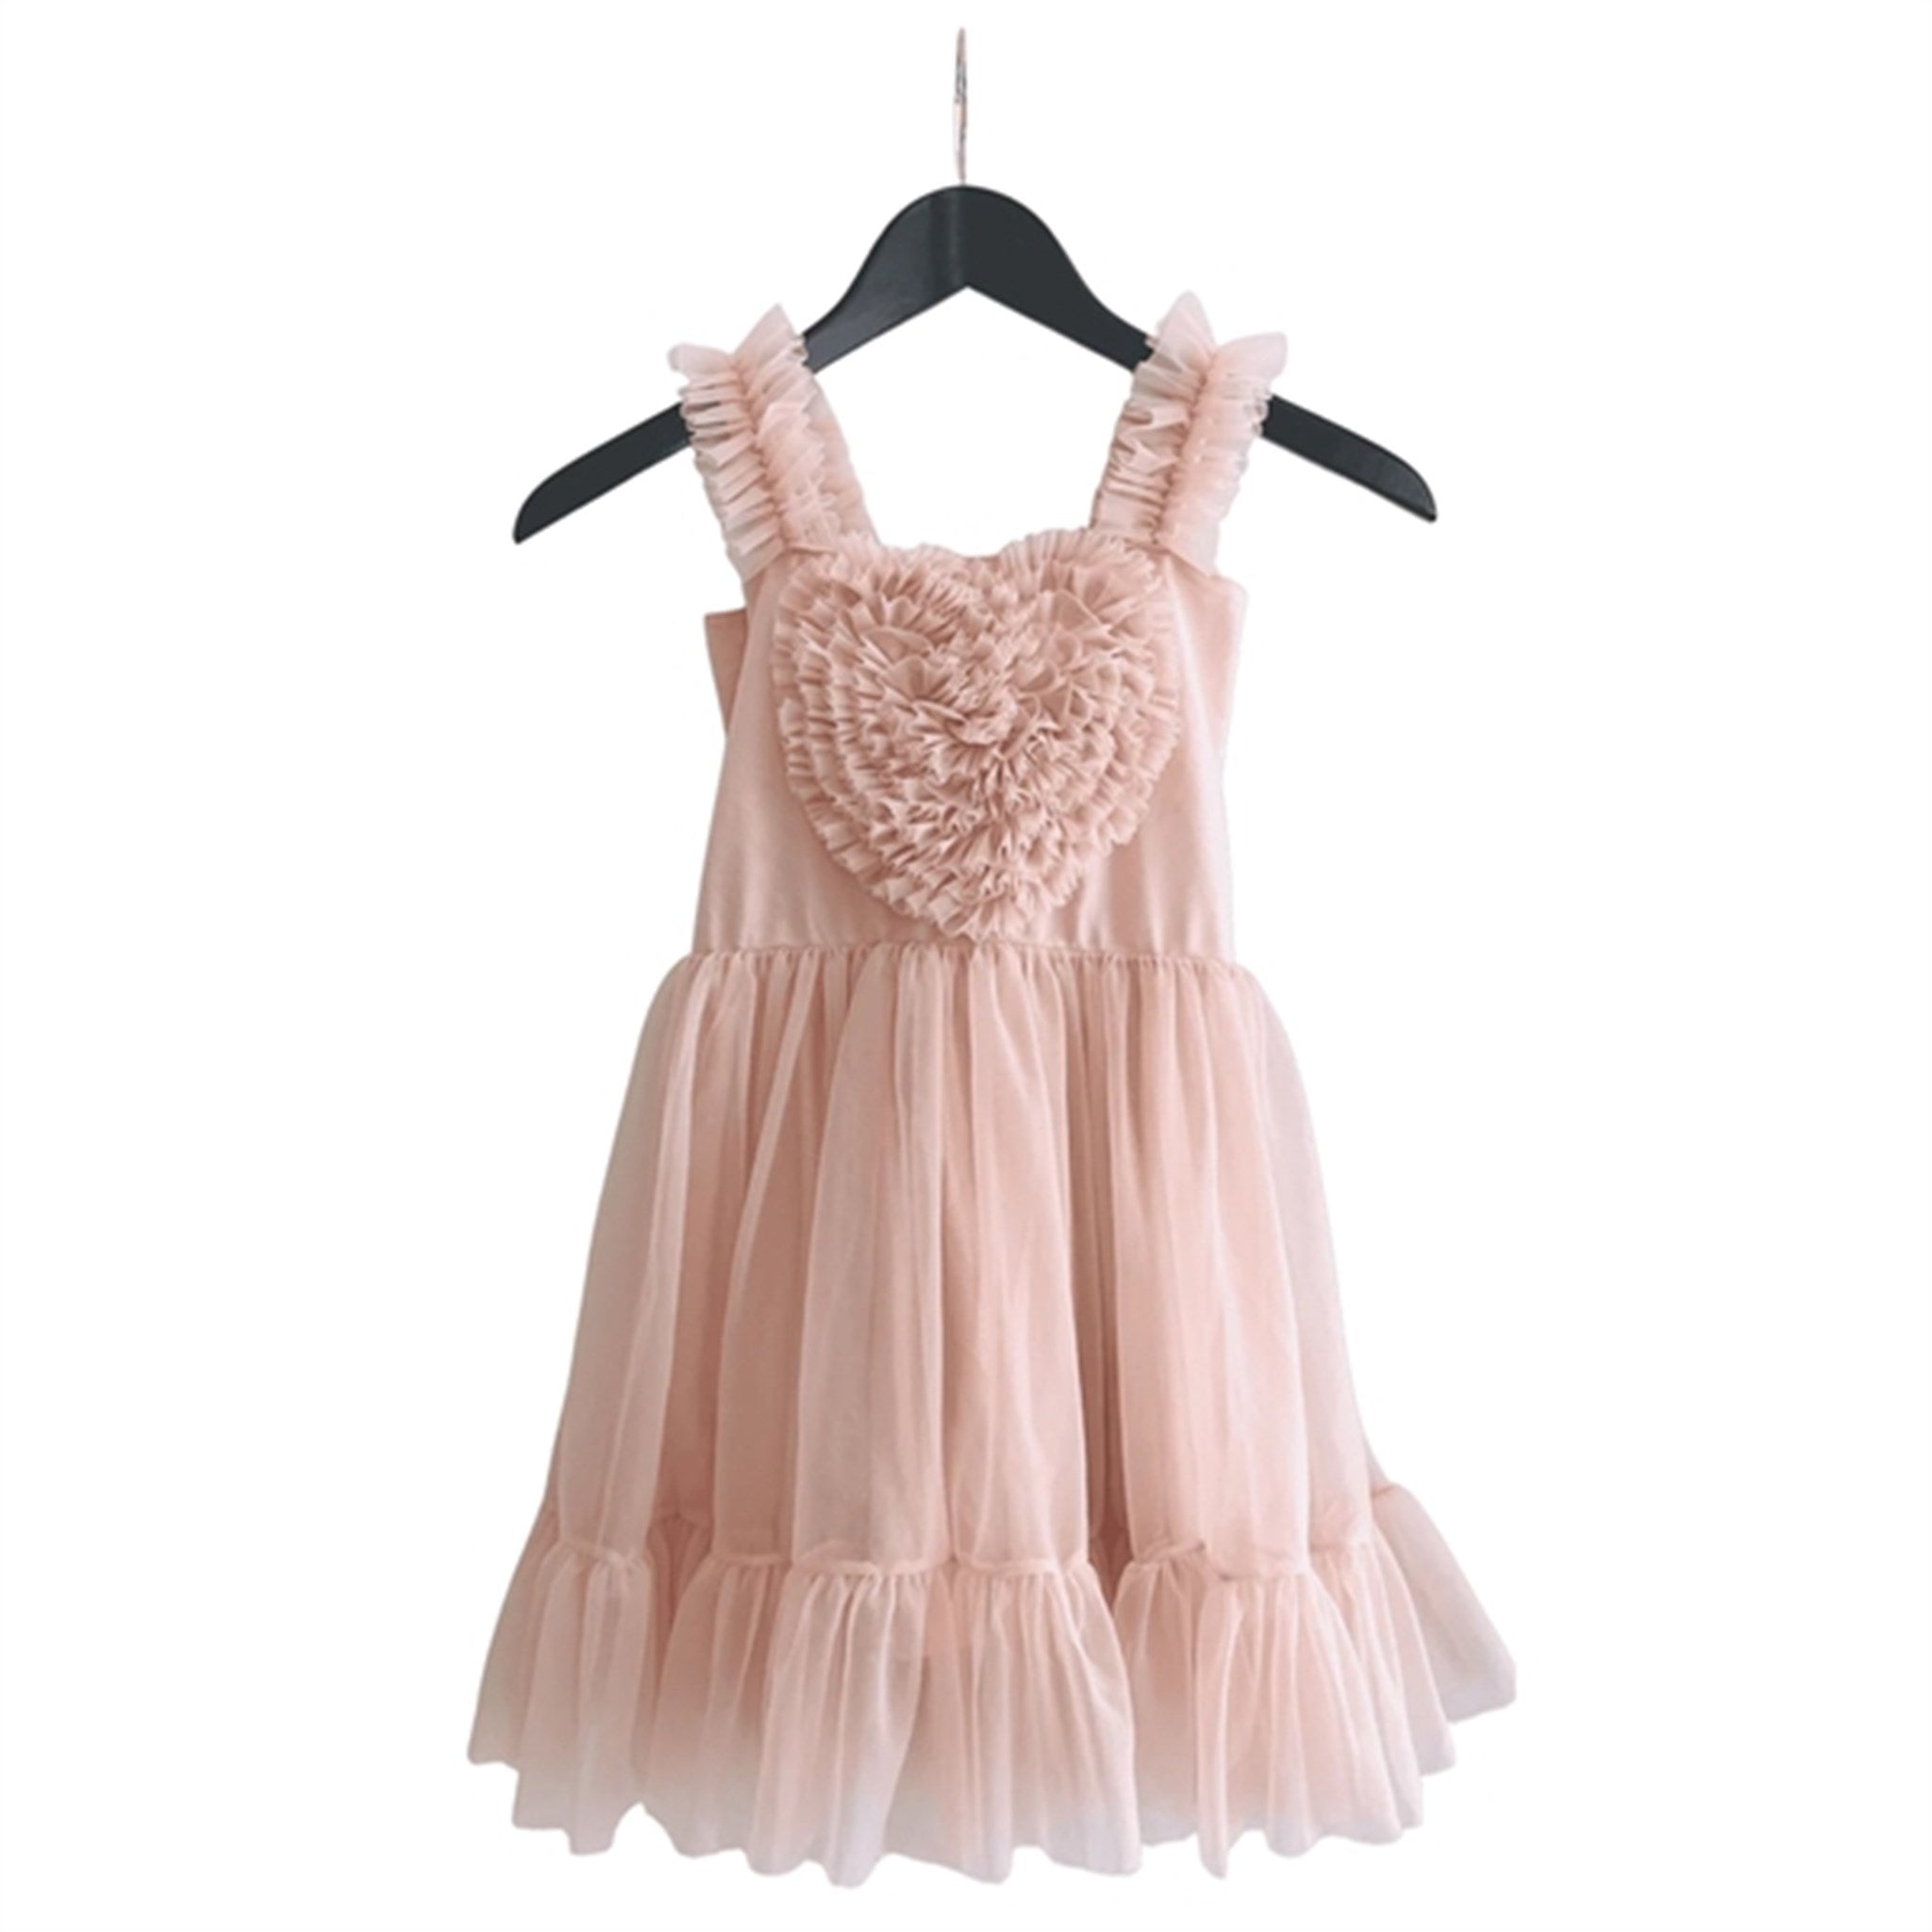 Dolly by Le Petit Heart Dress Lace Up Ballet Pink